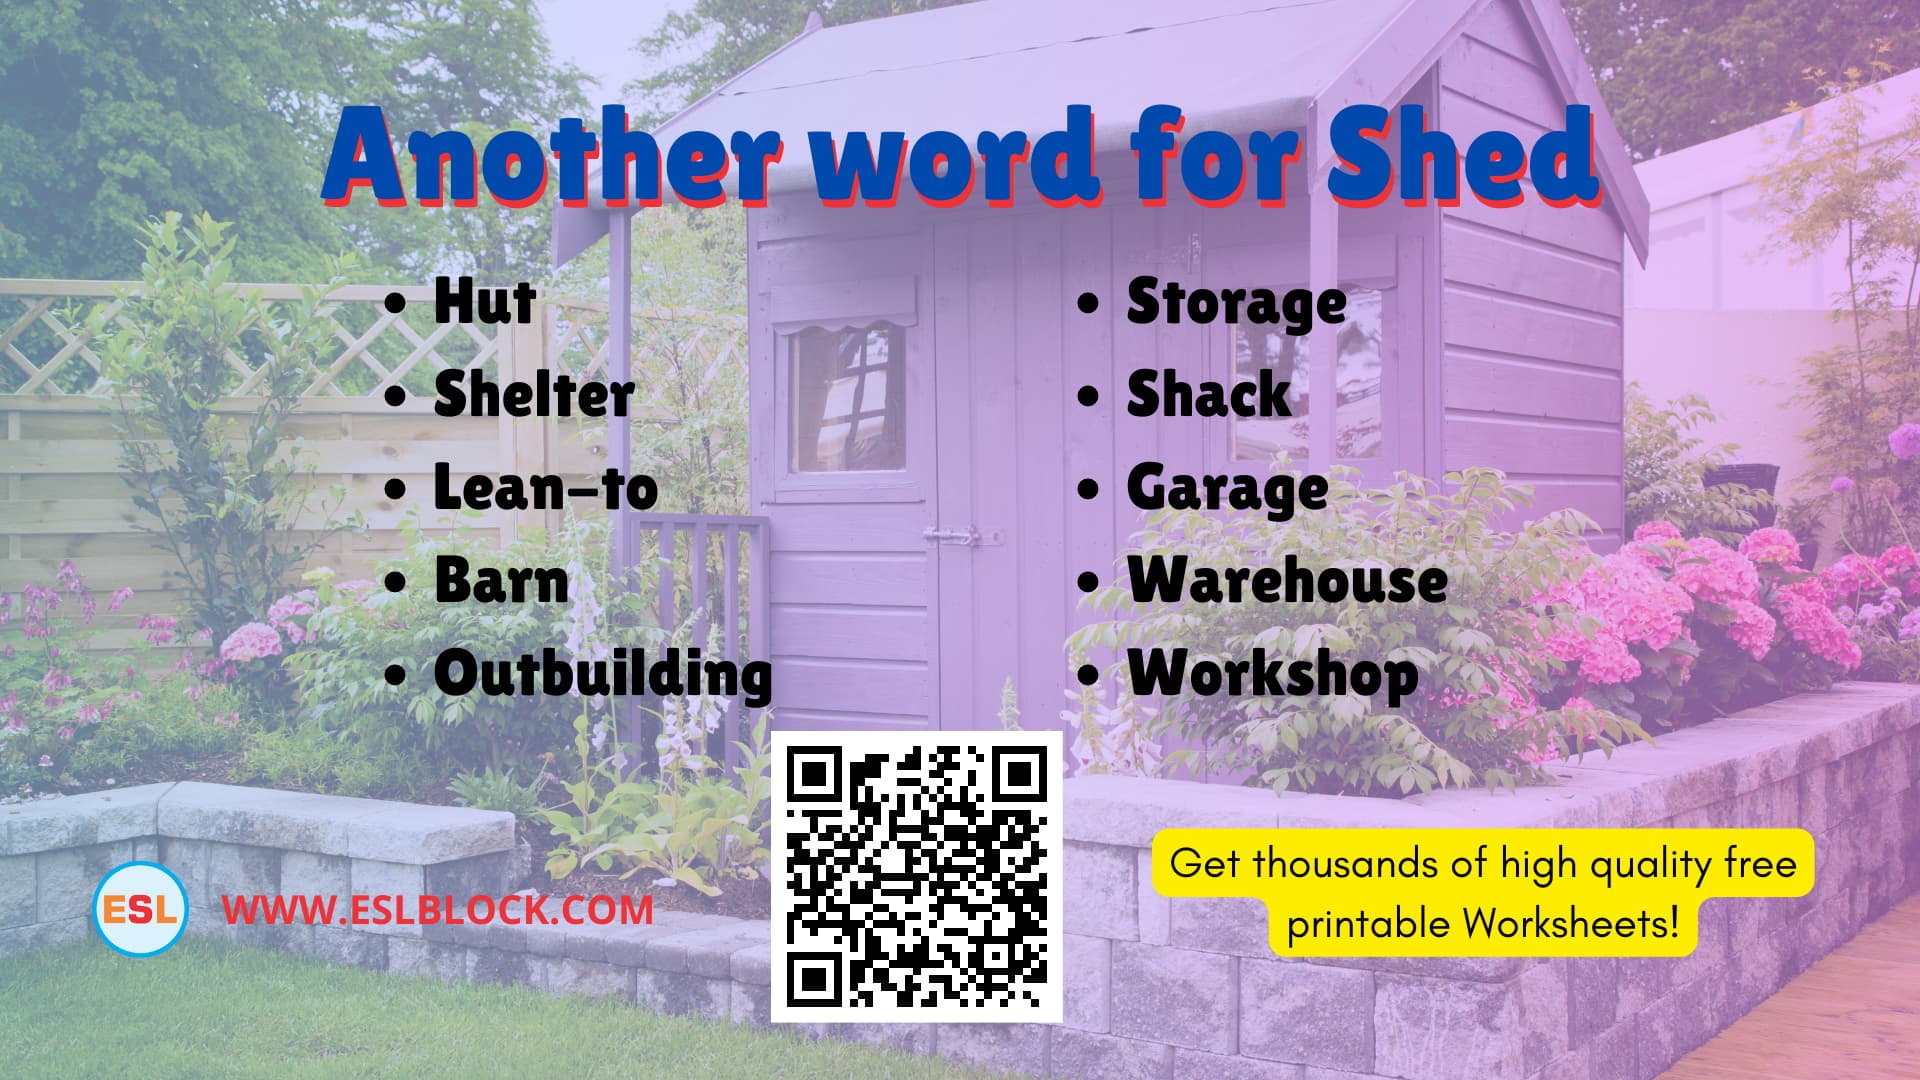 What is another word for Shed